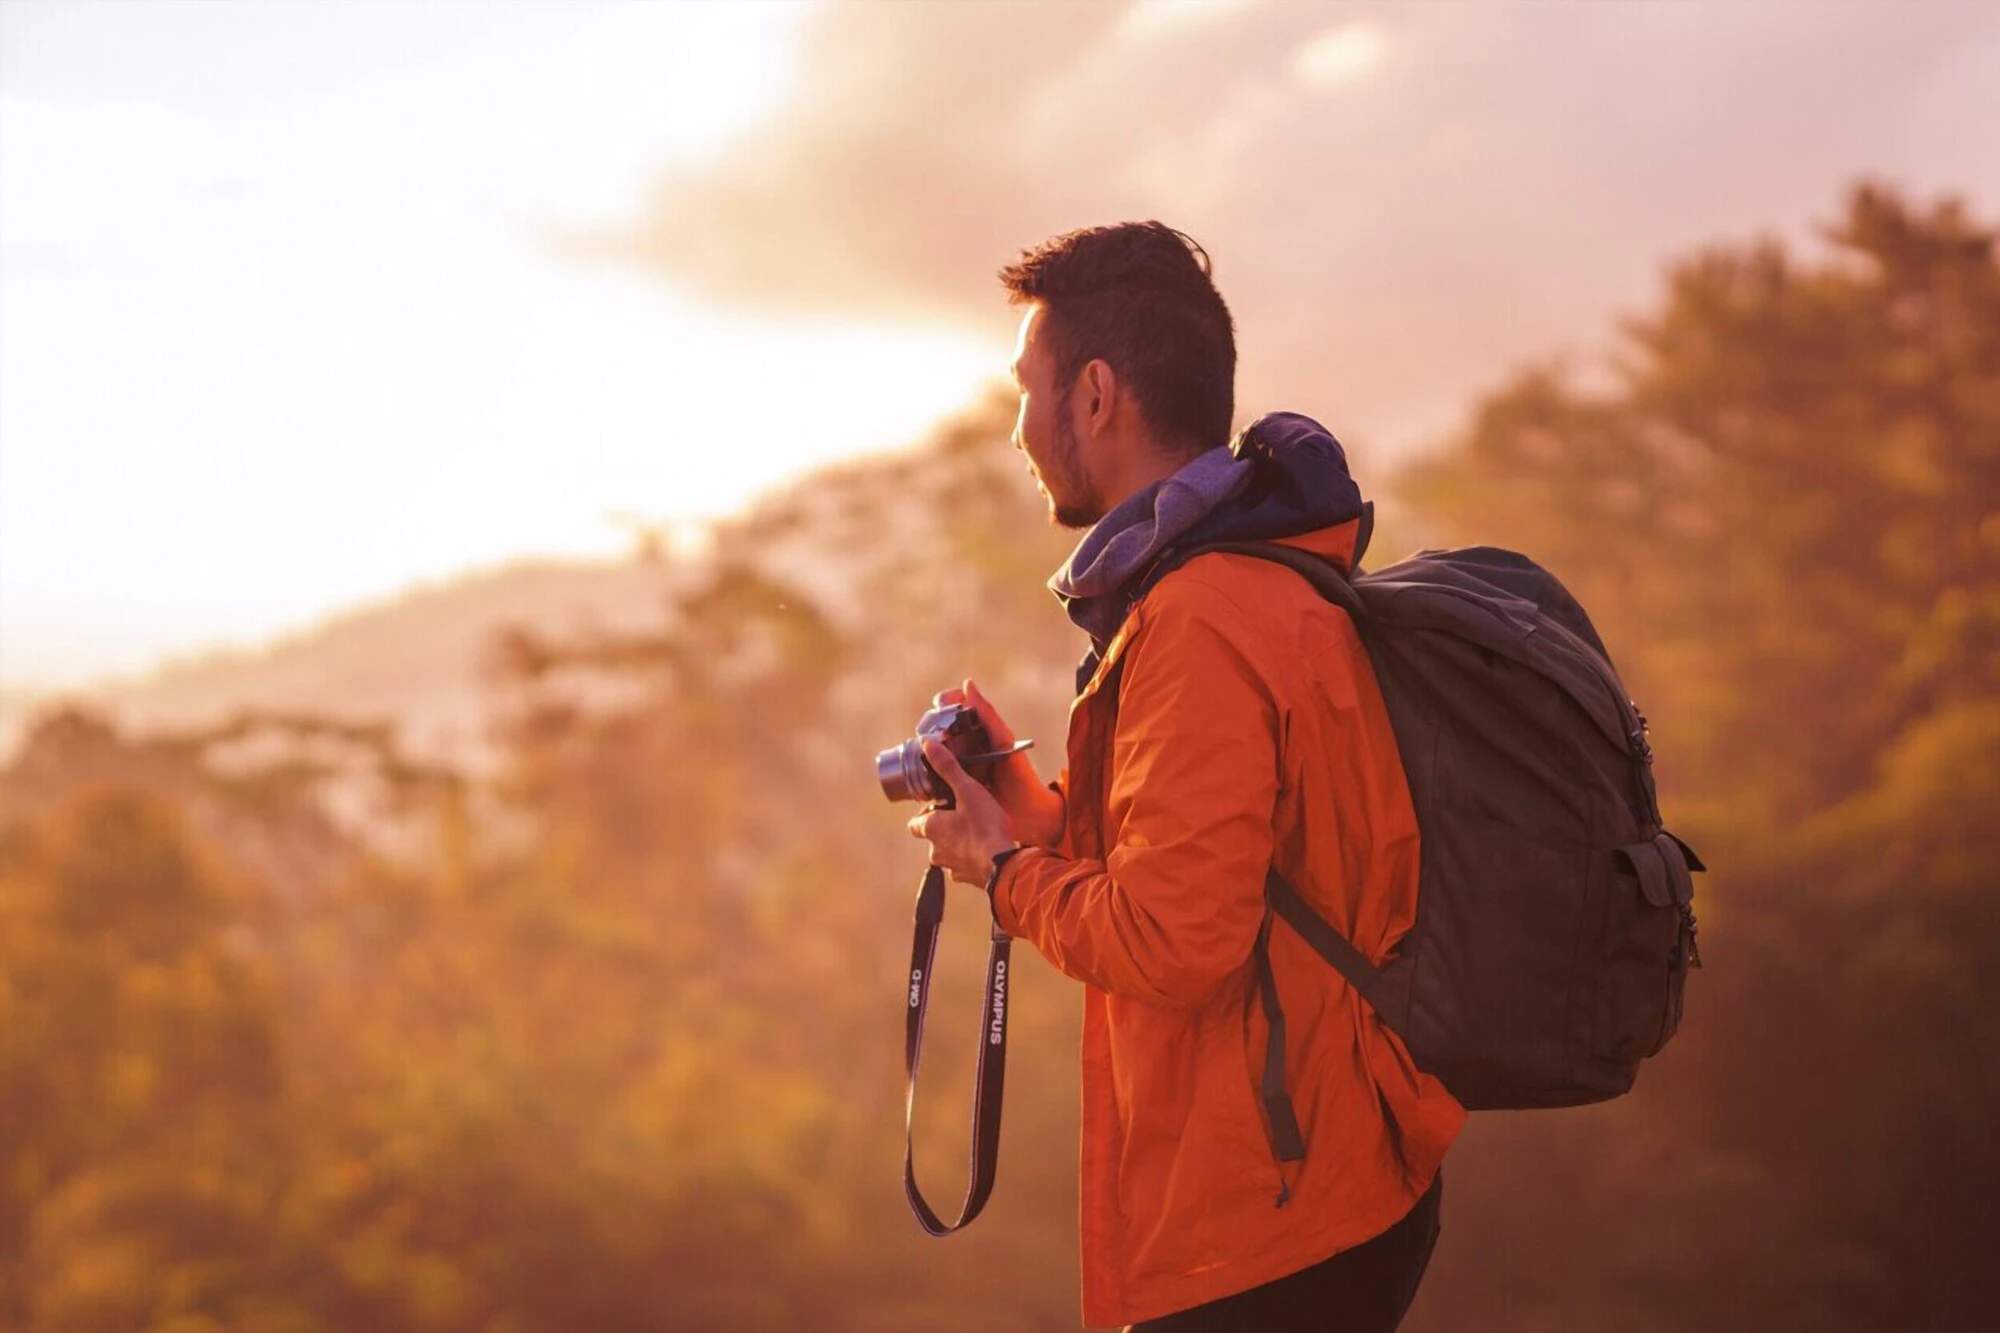 10 BEST Camera Bags for Hiking, Backpacking, and Travel